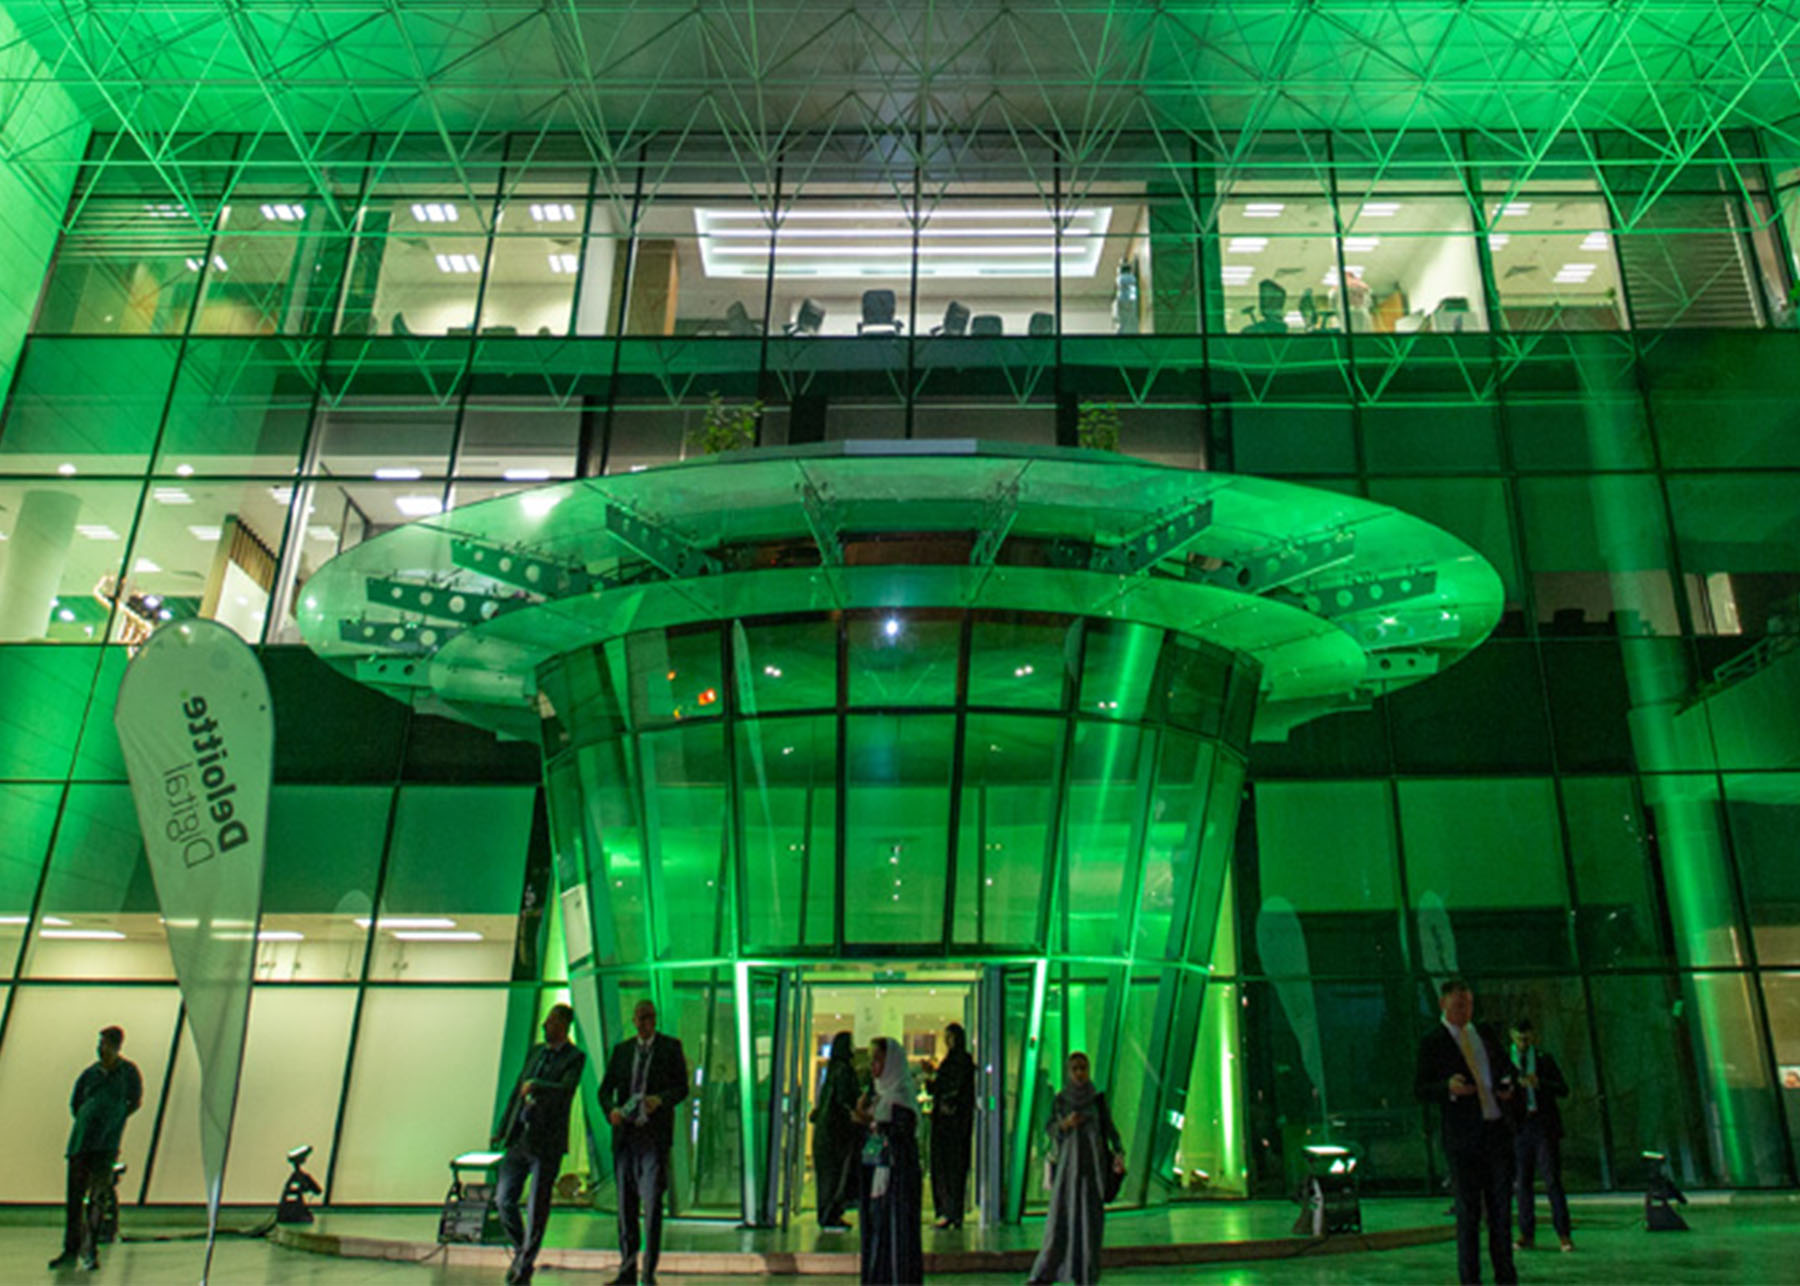 Exterior of  building for Deloitte event